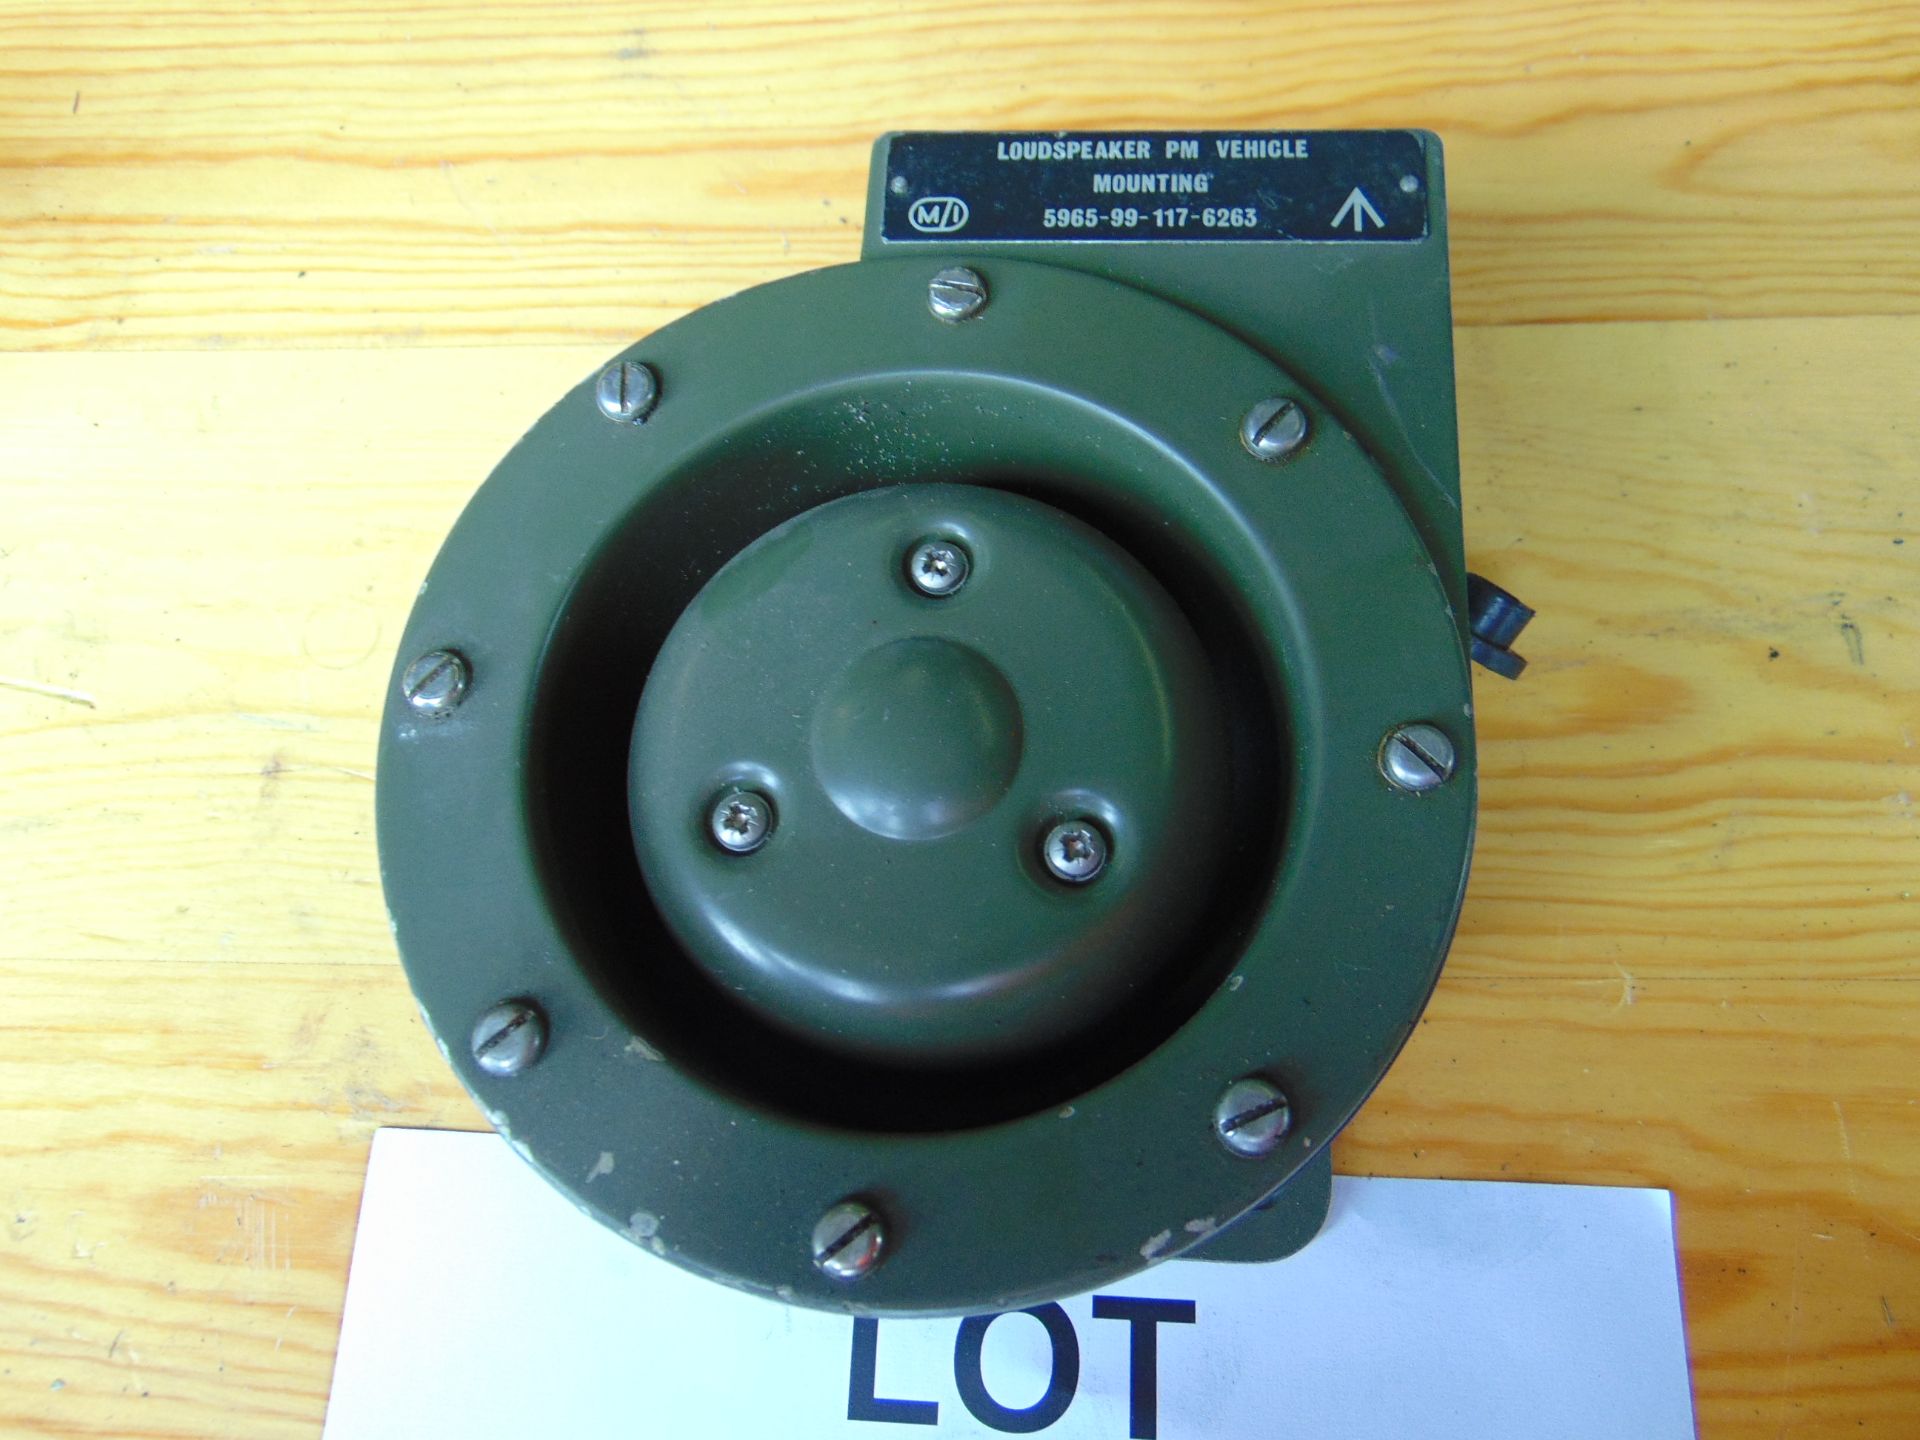 Clansman Loudspeaker PM for Vehicle Mounting A1 - Image 2 of 4